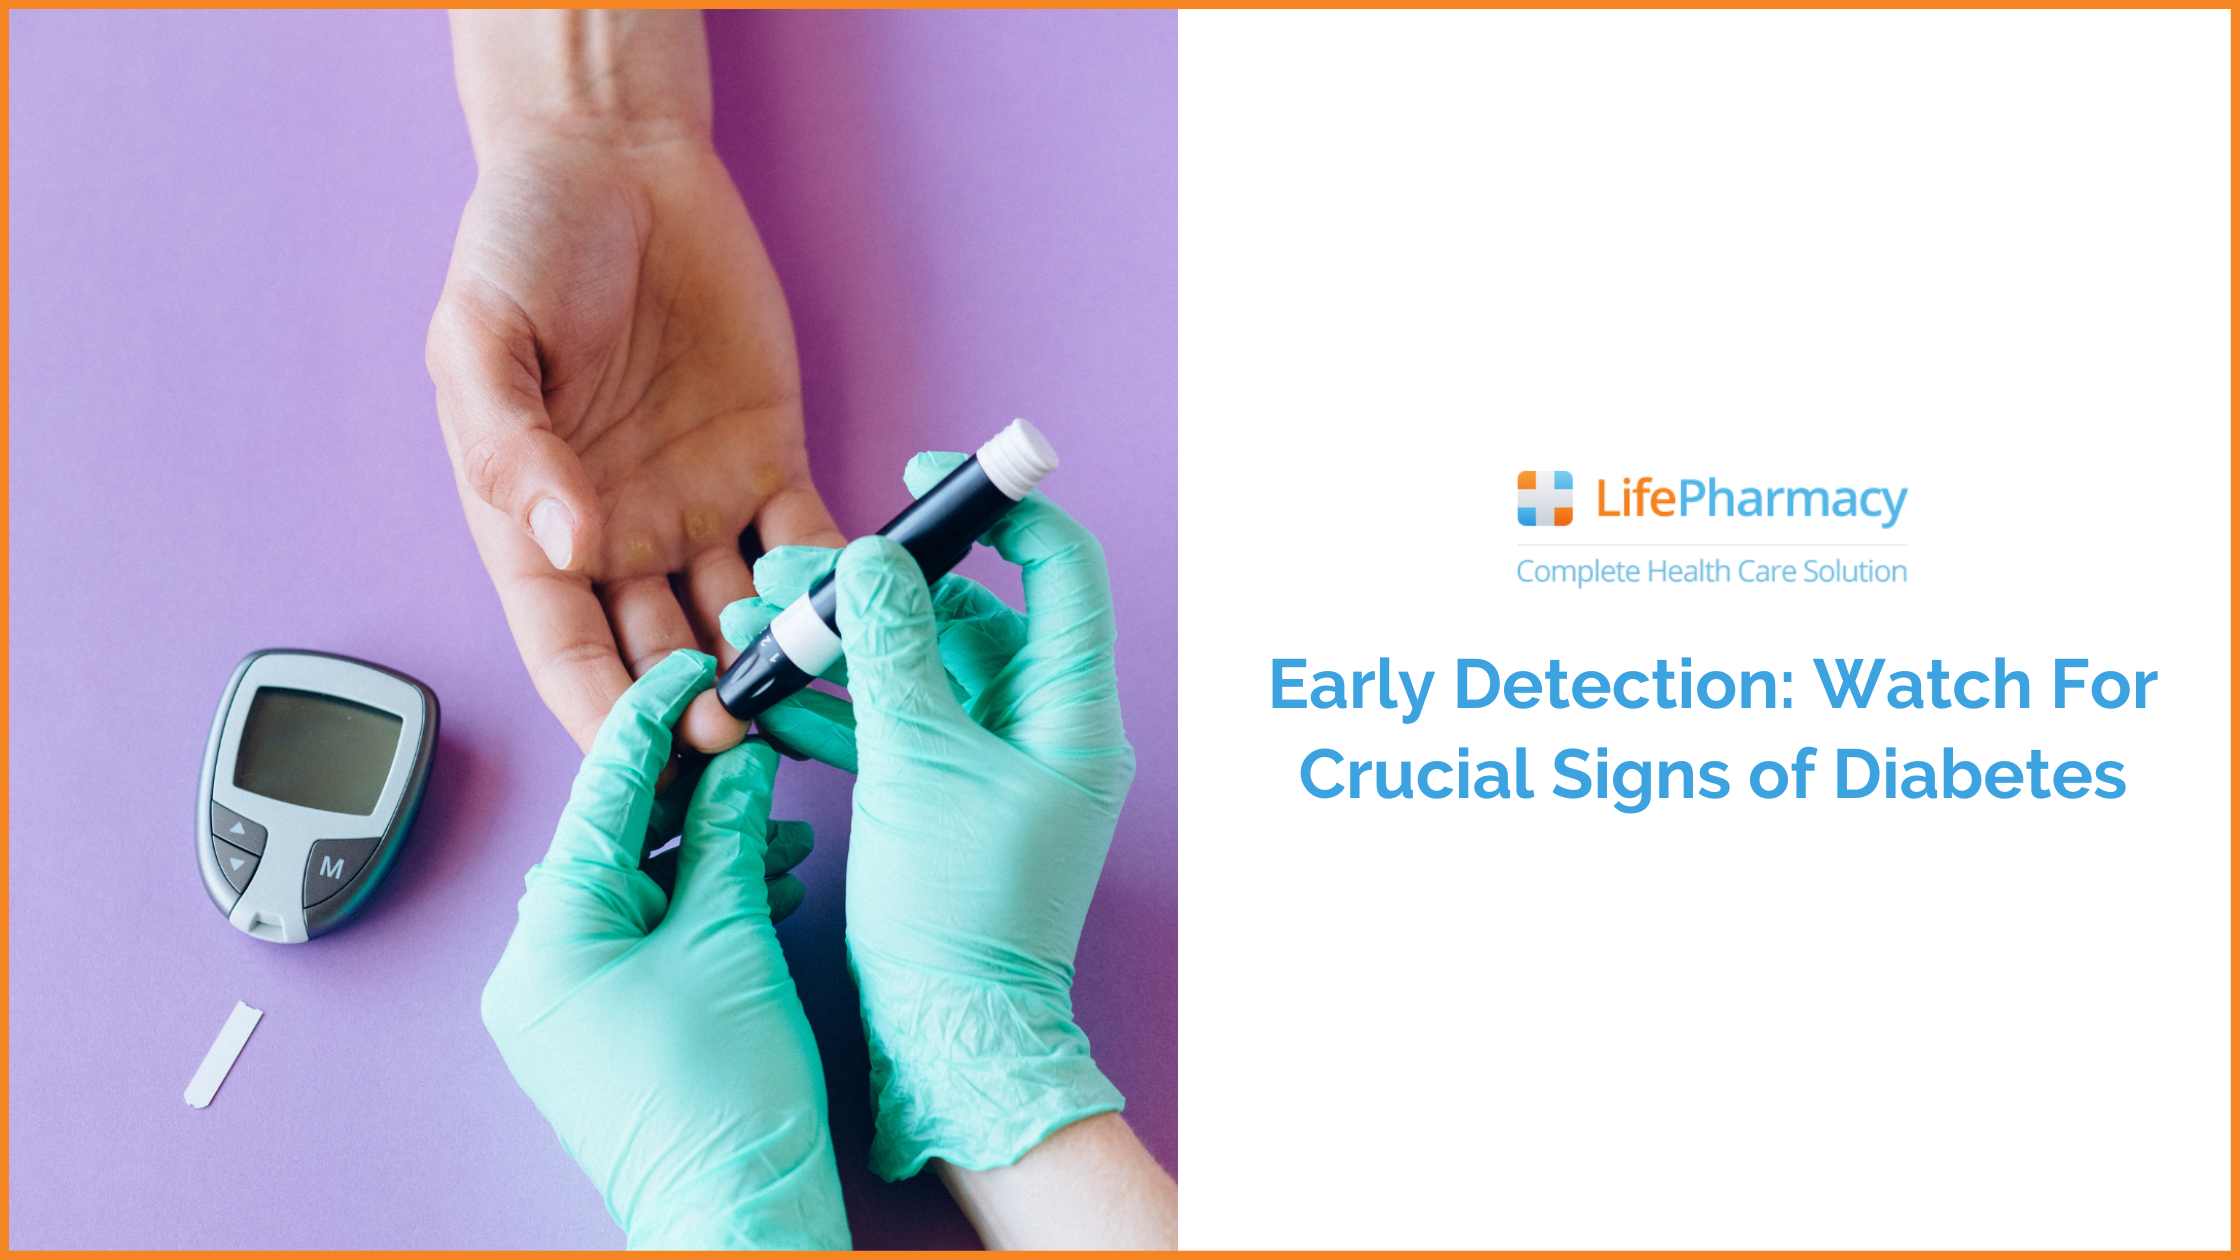 Early Detection Watch For Crucial Signs of Diabetes